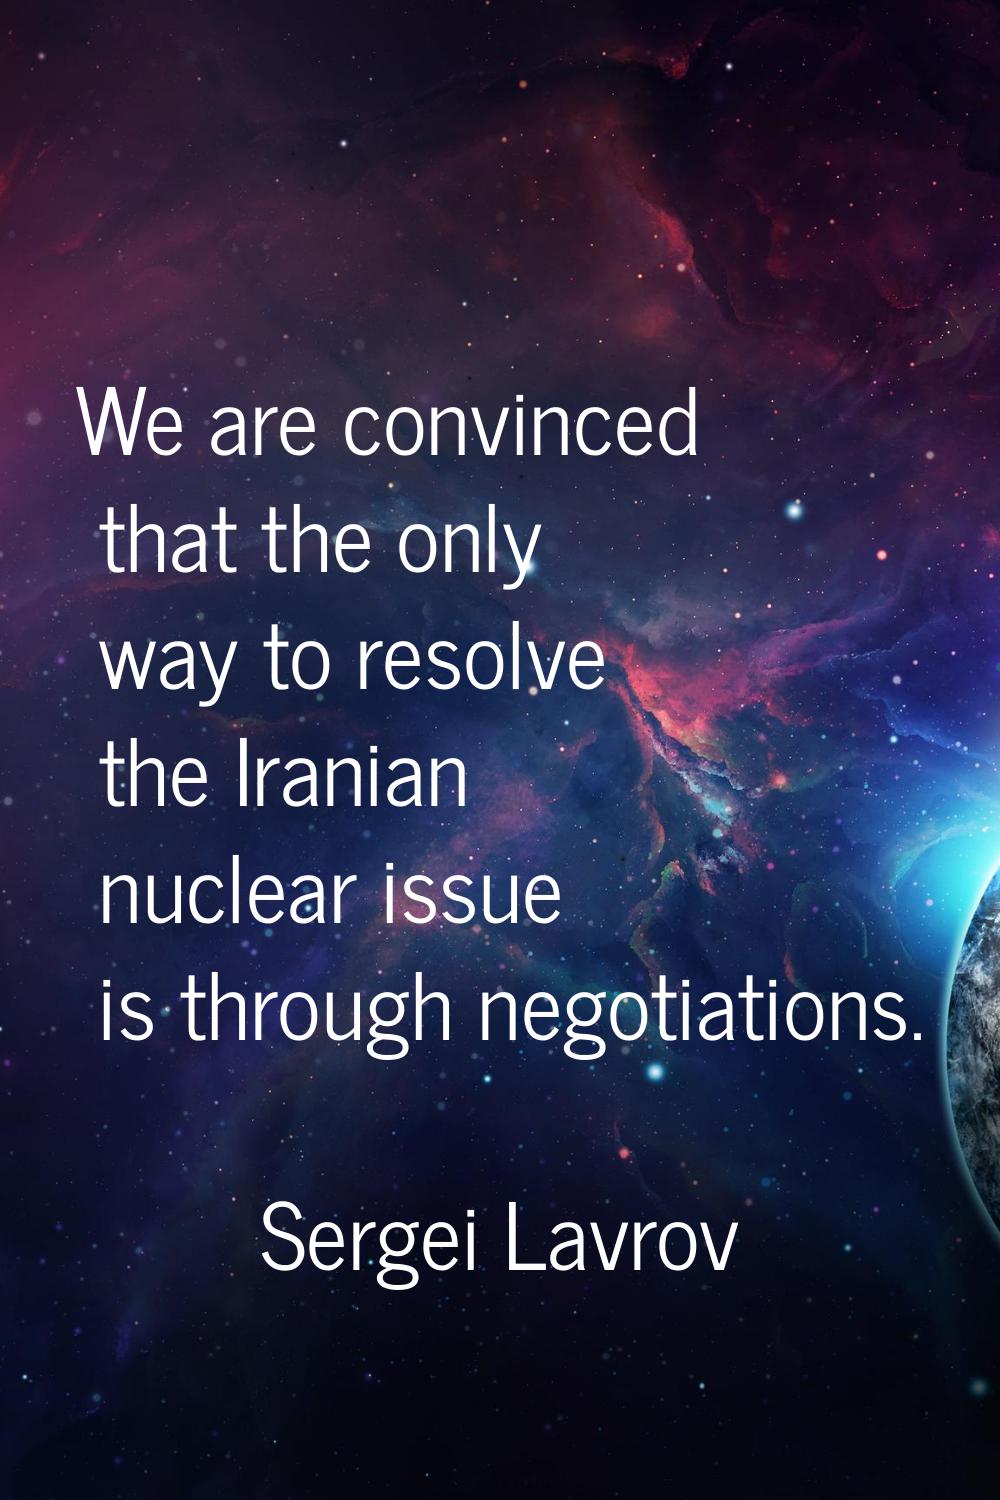 We are convinced that the only way to resolve the Iranian nuclear issue is through negotiations.